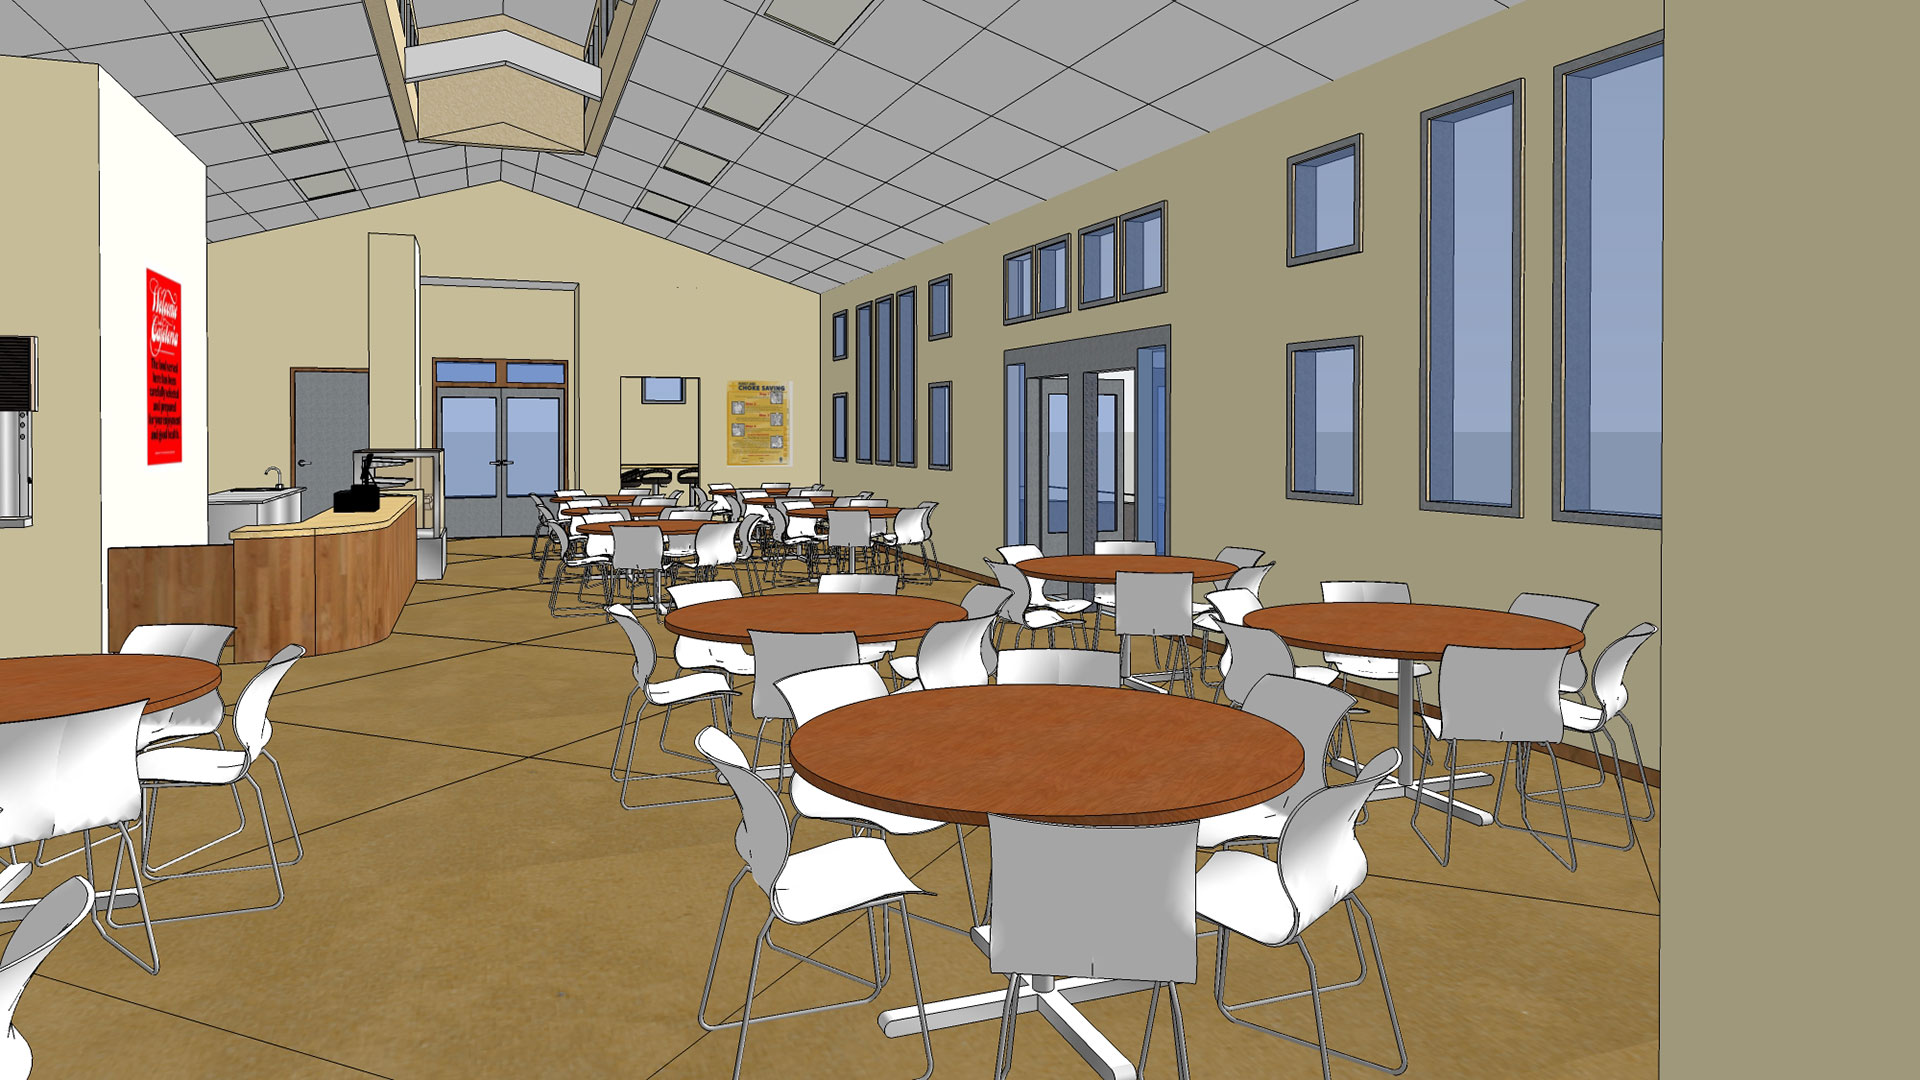 Rendering of cafeteria interior, greatly resembling the final built building.